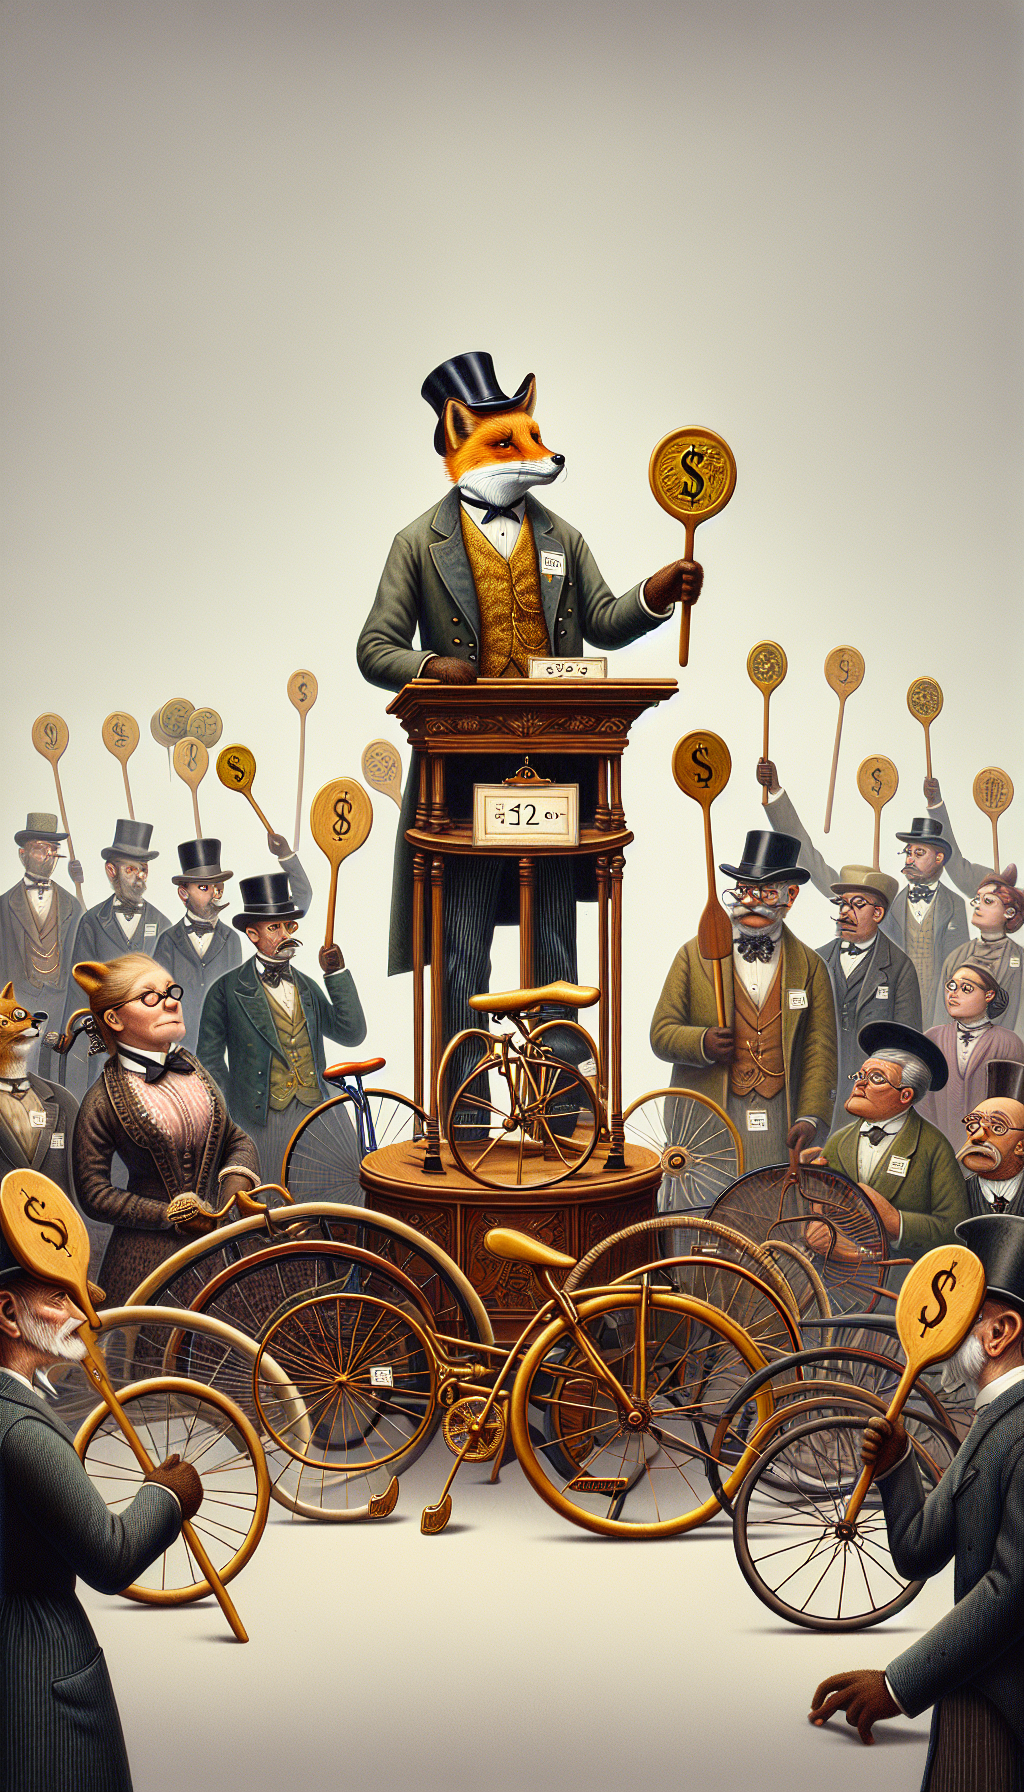 An elderly, distinguished-looking fox in vintage clothing holds an auctioneer's gavel atop a podium made of stacked antique tricycles. Each tricycle showcases a price tag with various hefty sums, while animated, refined characters of different eras fervently bid, holding up paddles with cash and gold coins. The scene blends Victorian flair with comic art, accentuating the timeless value of antique tricycles.